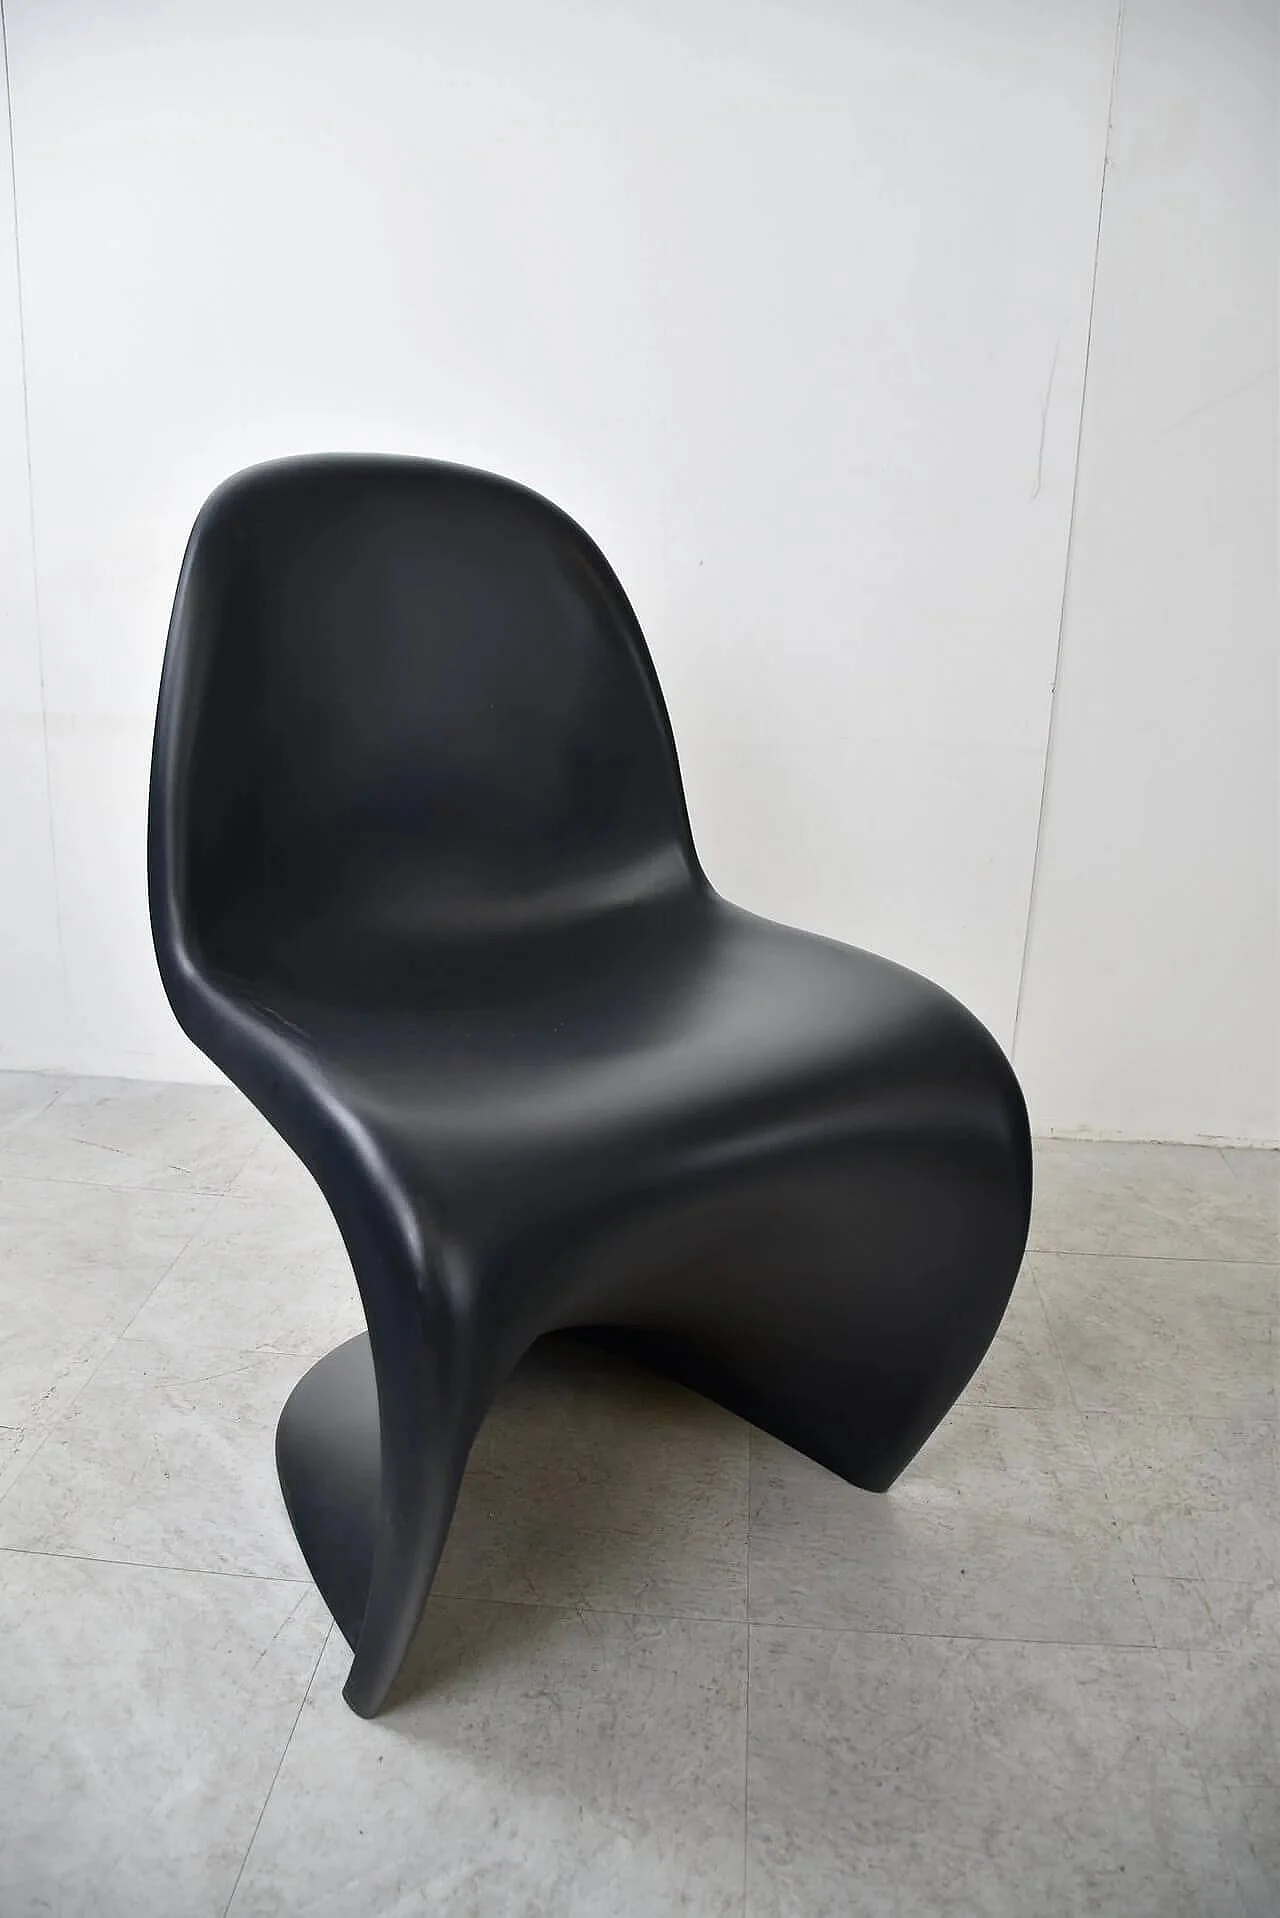 4 Panton Chair S in polypropylene by Verner Panton for Vitra 9